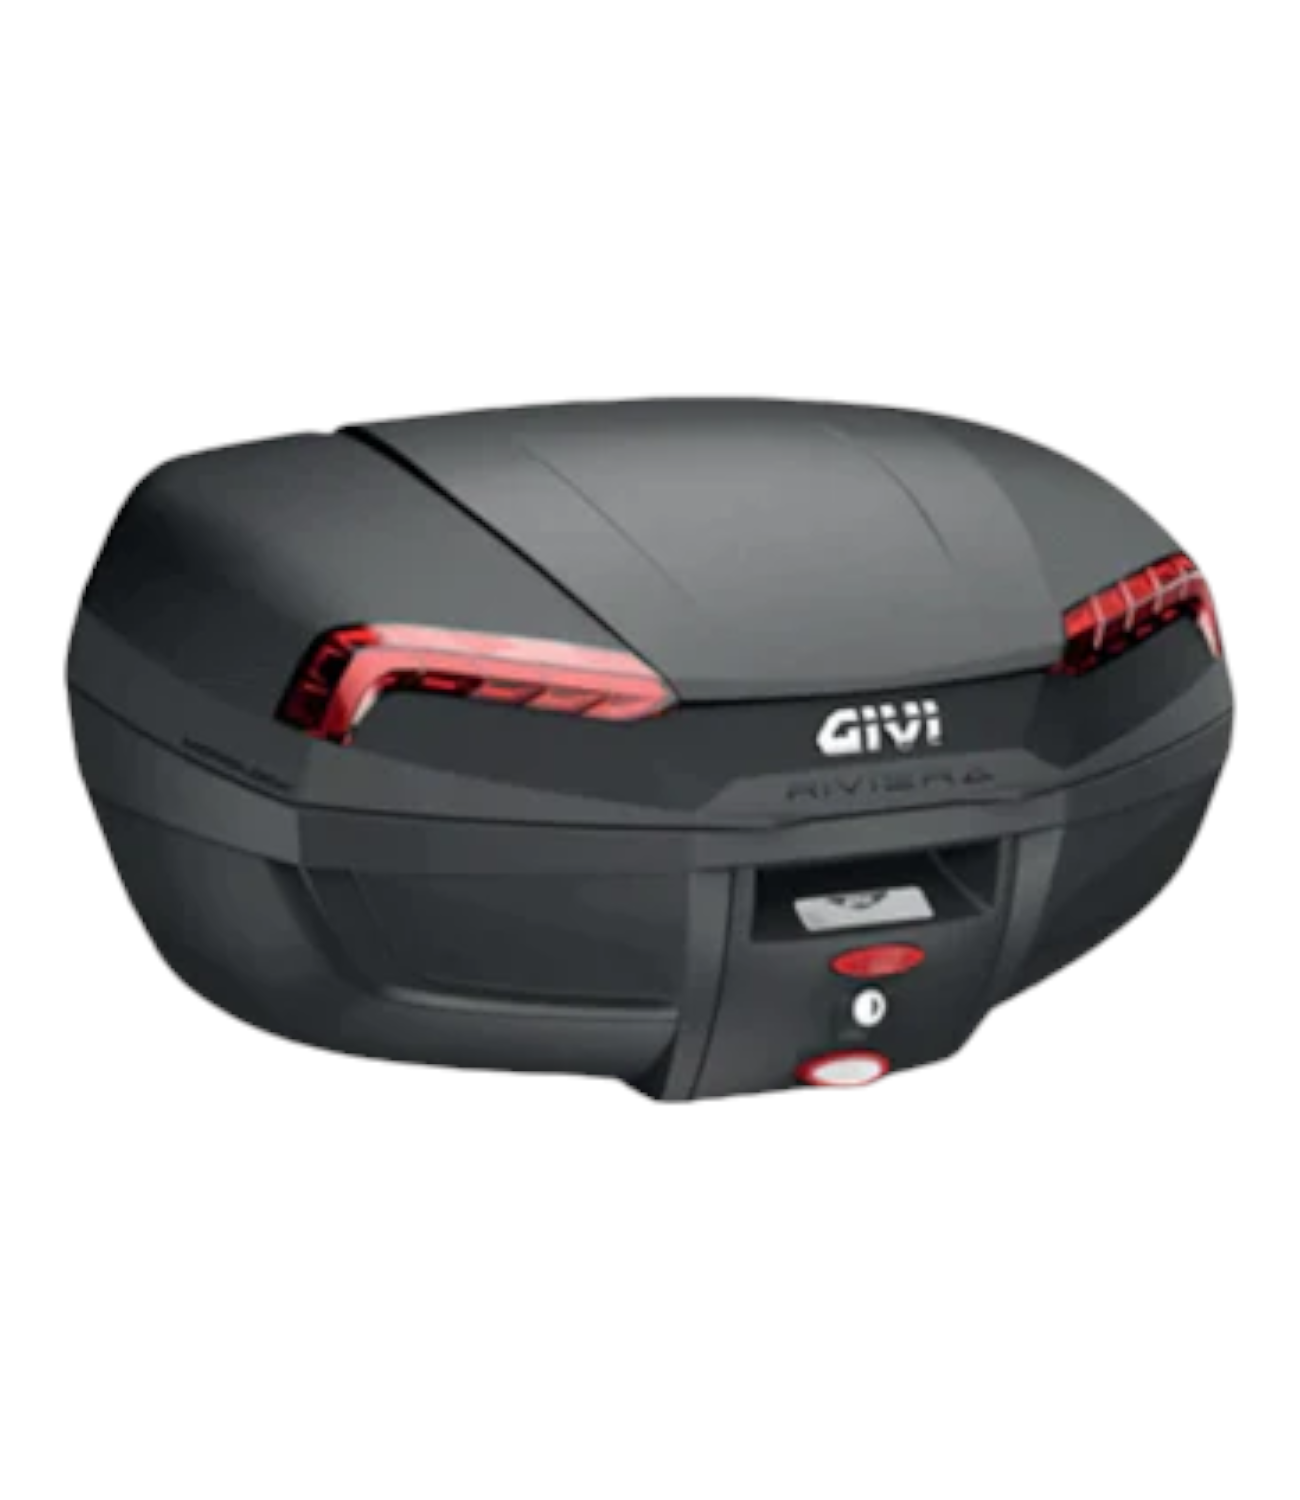 Givi - 46 Ltr Monolock Top-Case Black With Red Reflectors, Universal Mounting Plate Included